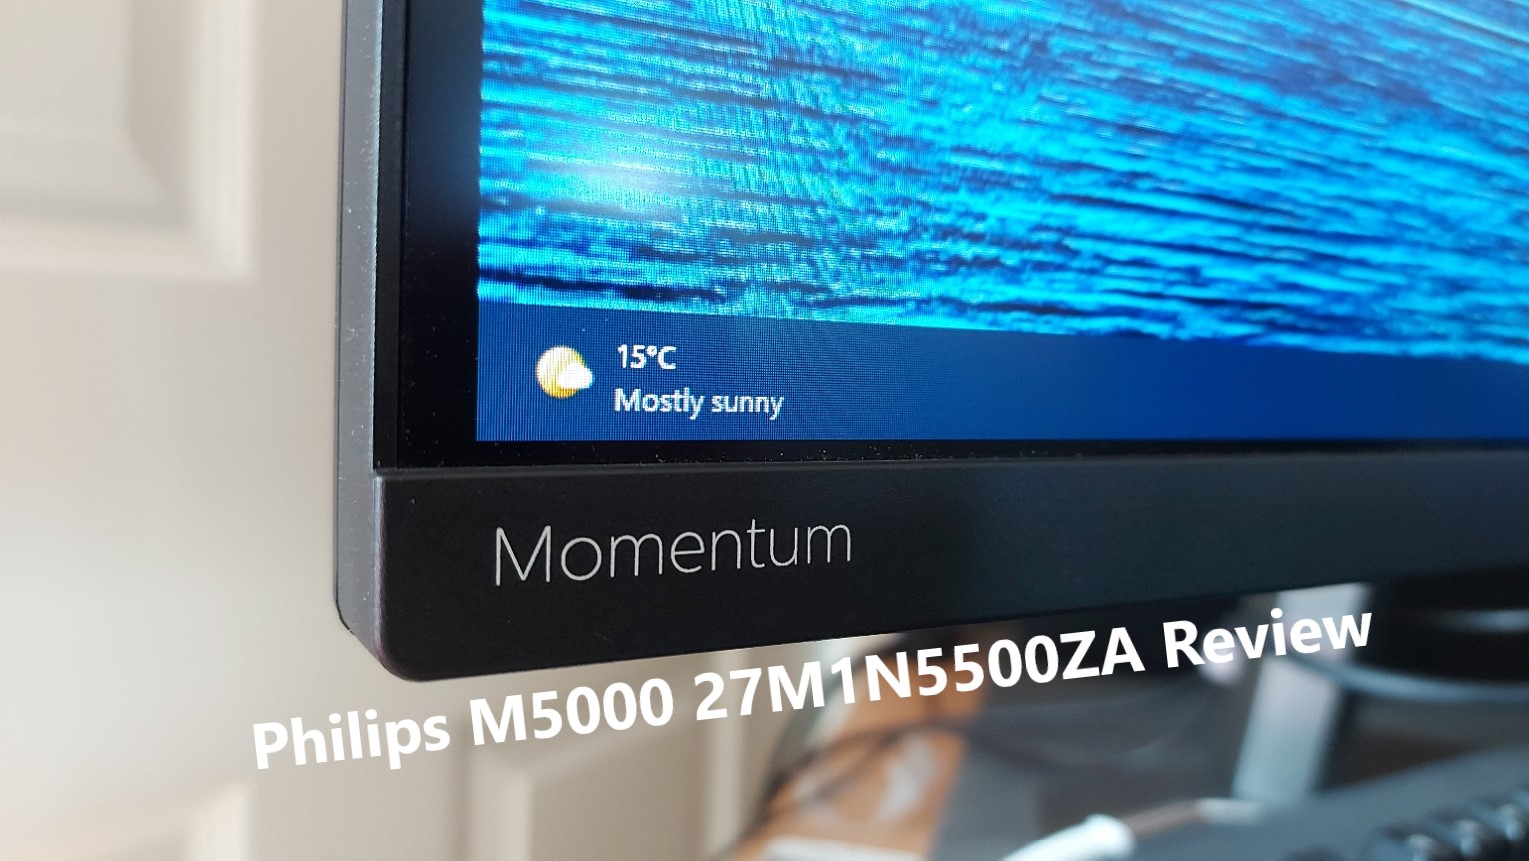 Philips Momentum 5000 27M1N5500ZA Review Total - Gaming Addicts